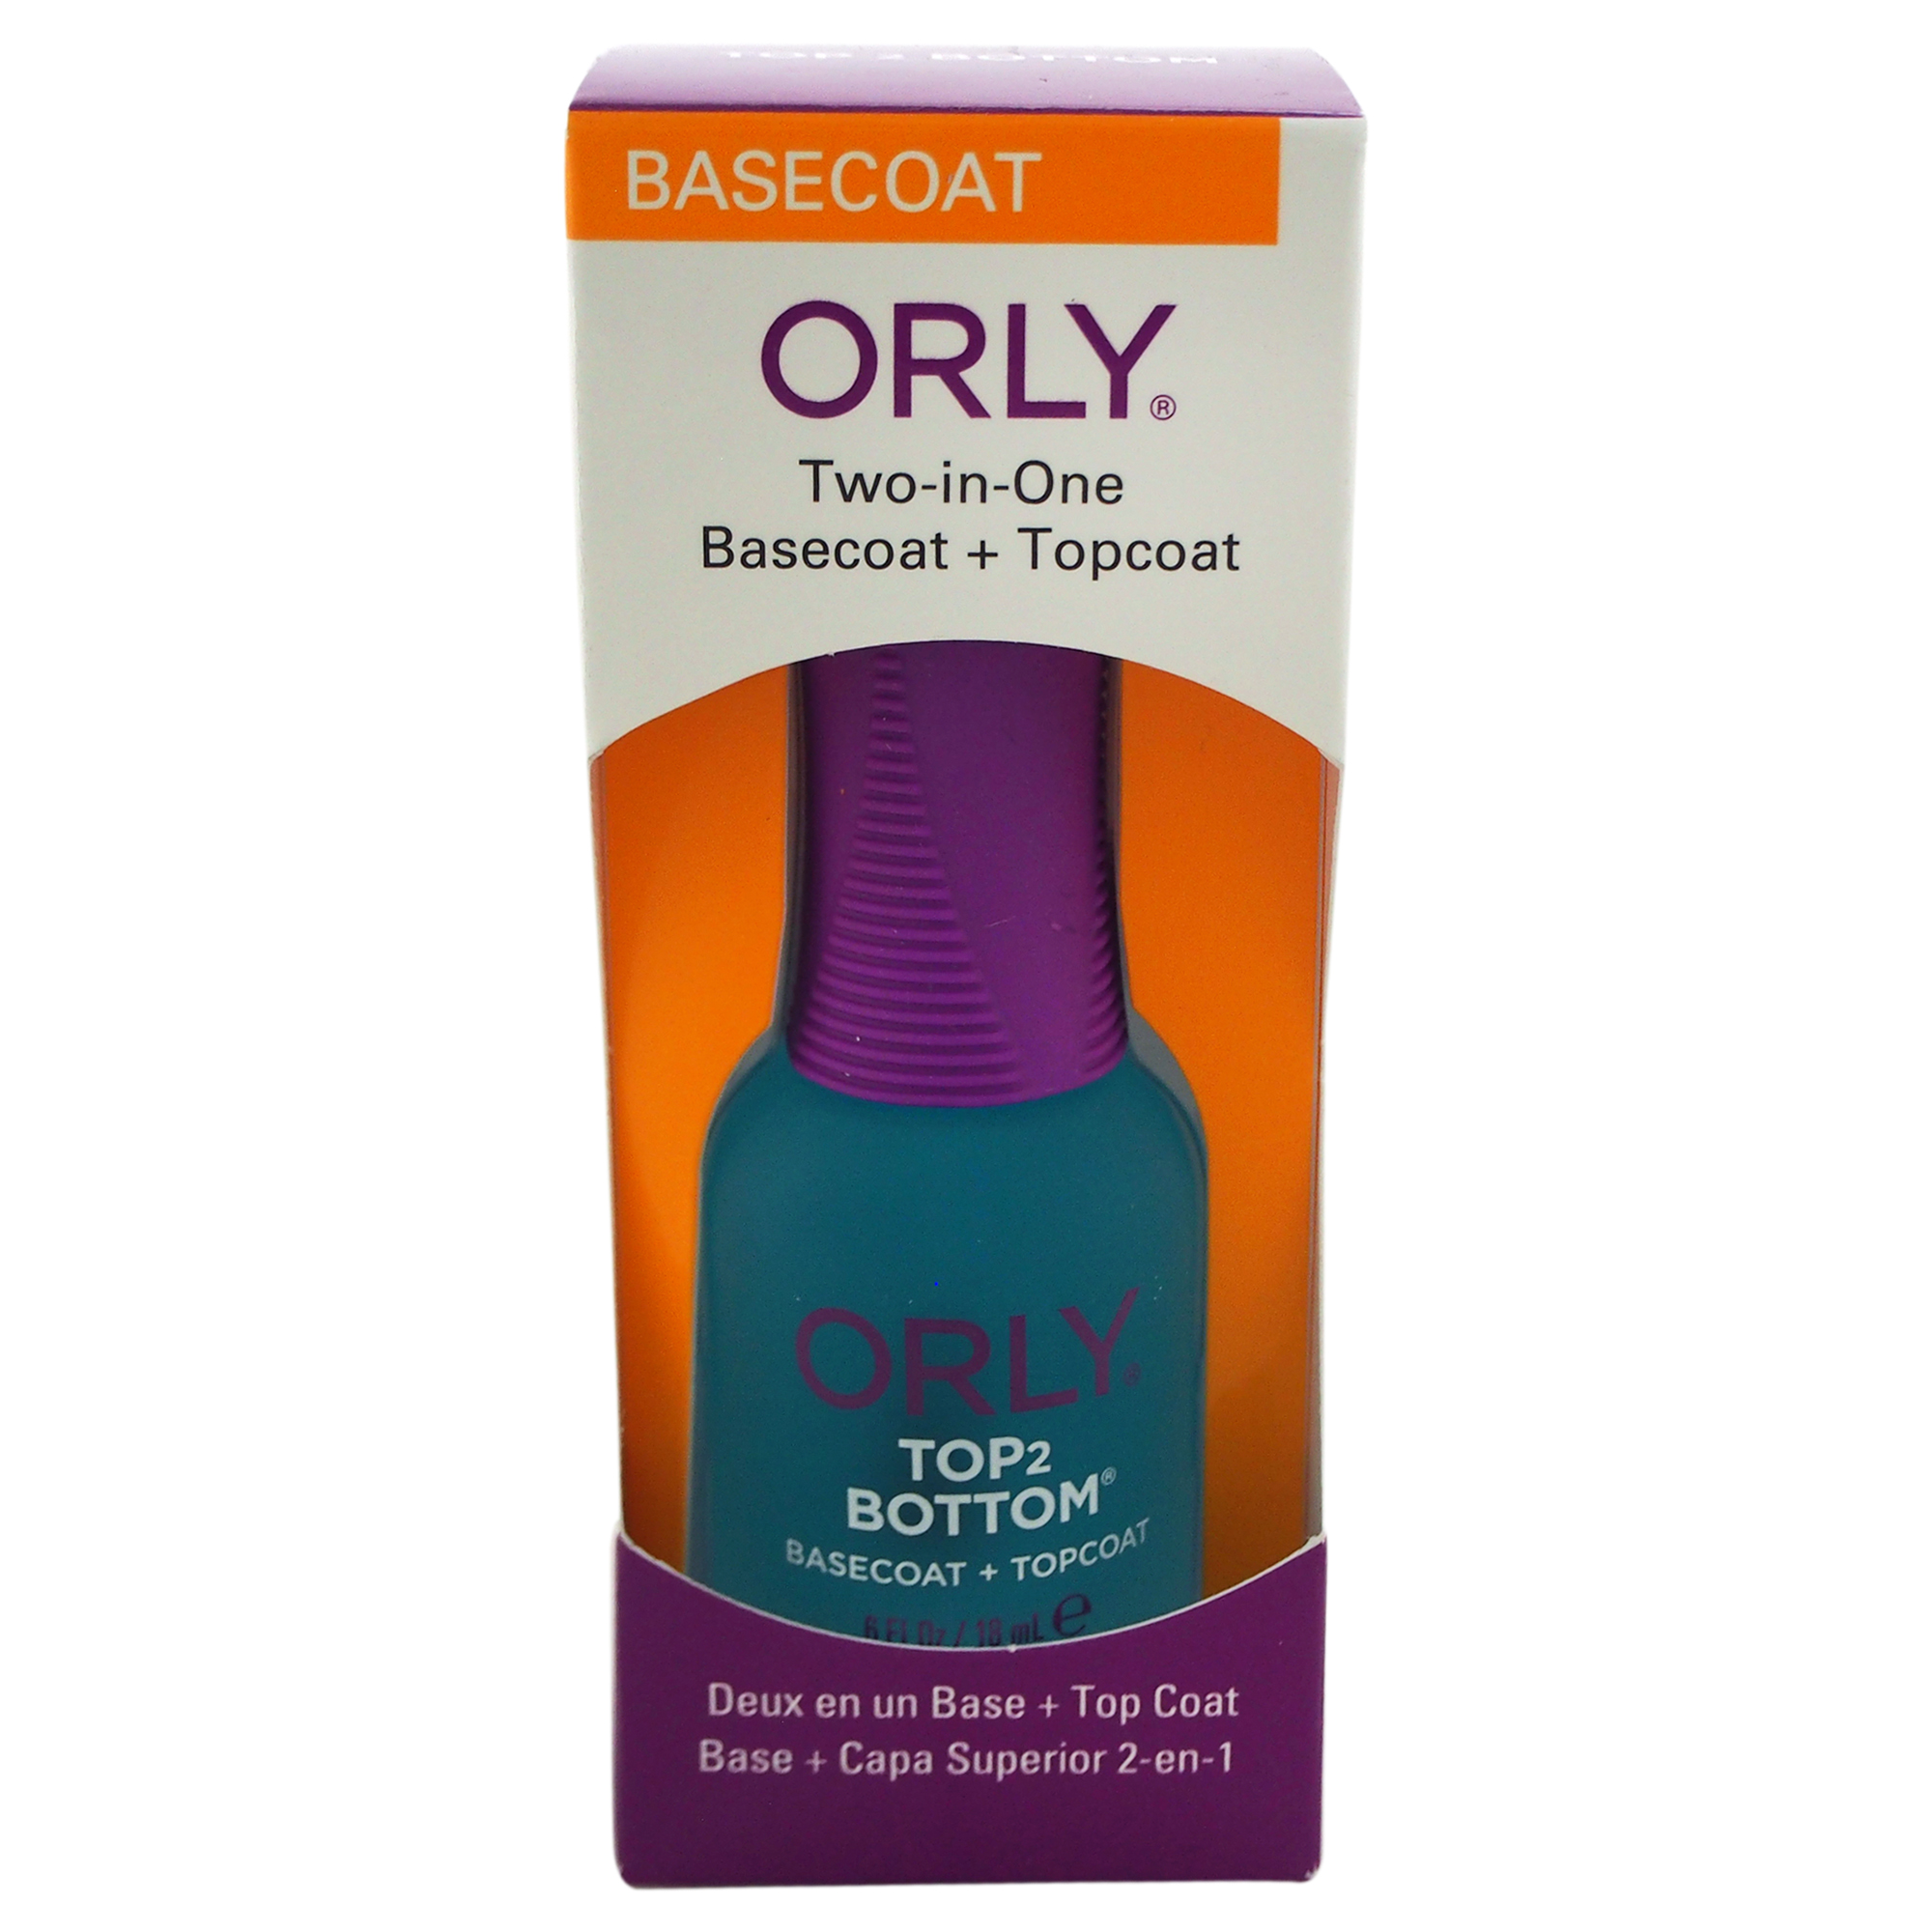 ORLY Top 2 Bottom Basecoat + Topcoat by  for Women - 0.6 oz Nail Polish